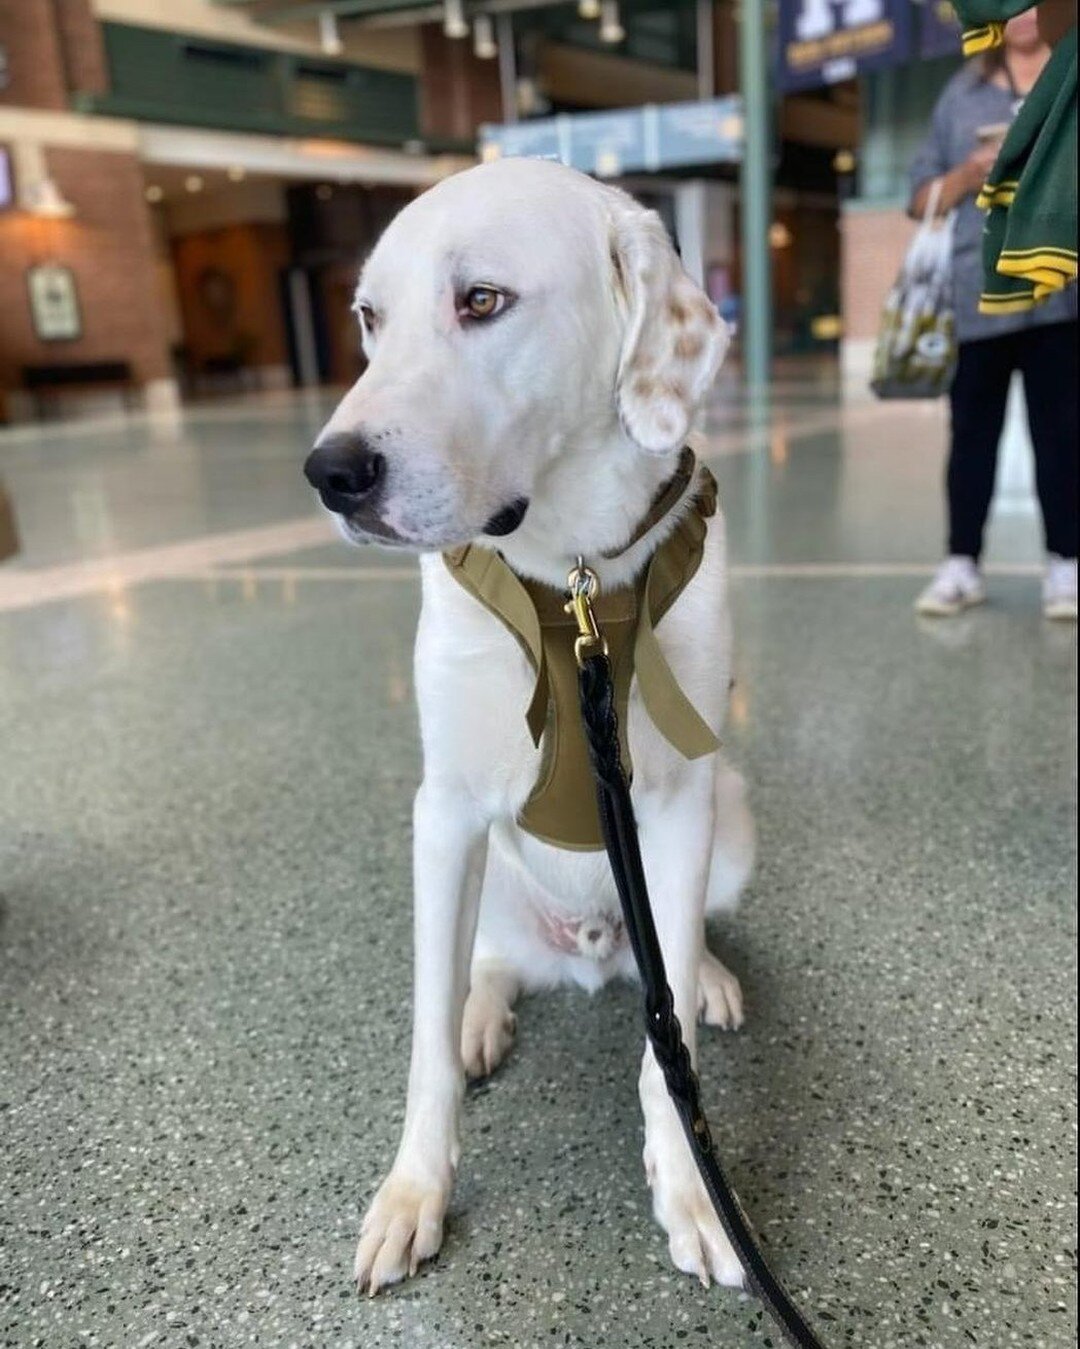 GO PACK GO! First home game of the season tonight for the #Packers 

This photo was taken on a tour of Lambeau Field that Patton attended with his veteran, Ric. The tour guides said Patton was the first support animal they'd had on a tour! 💚💛

#vet